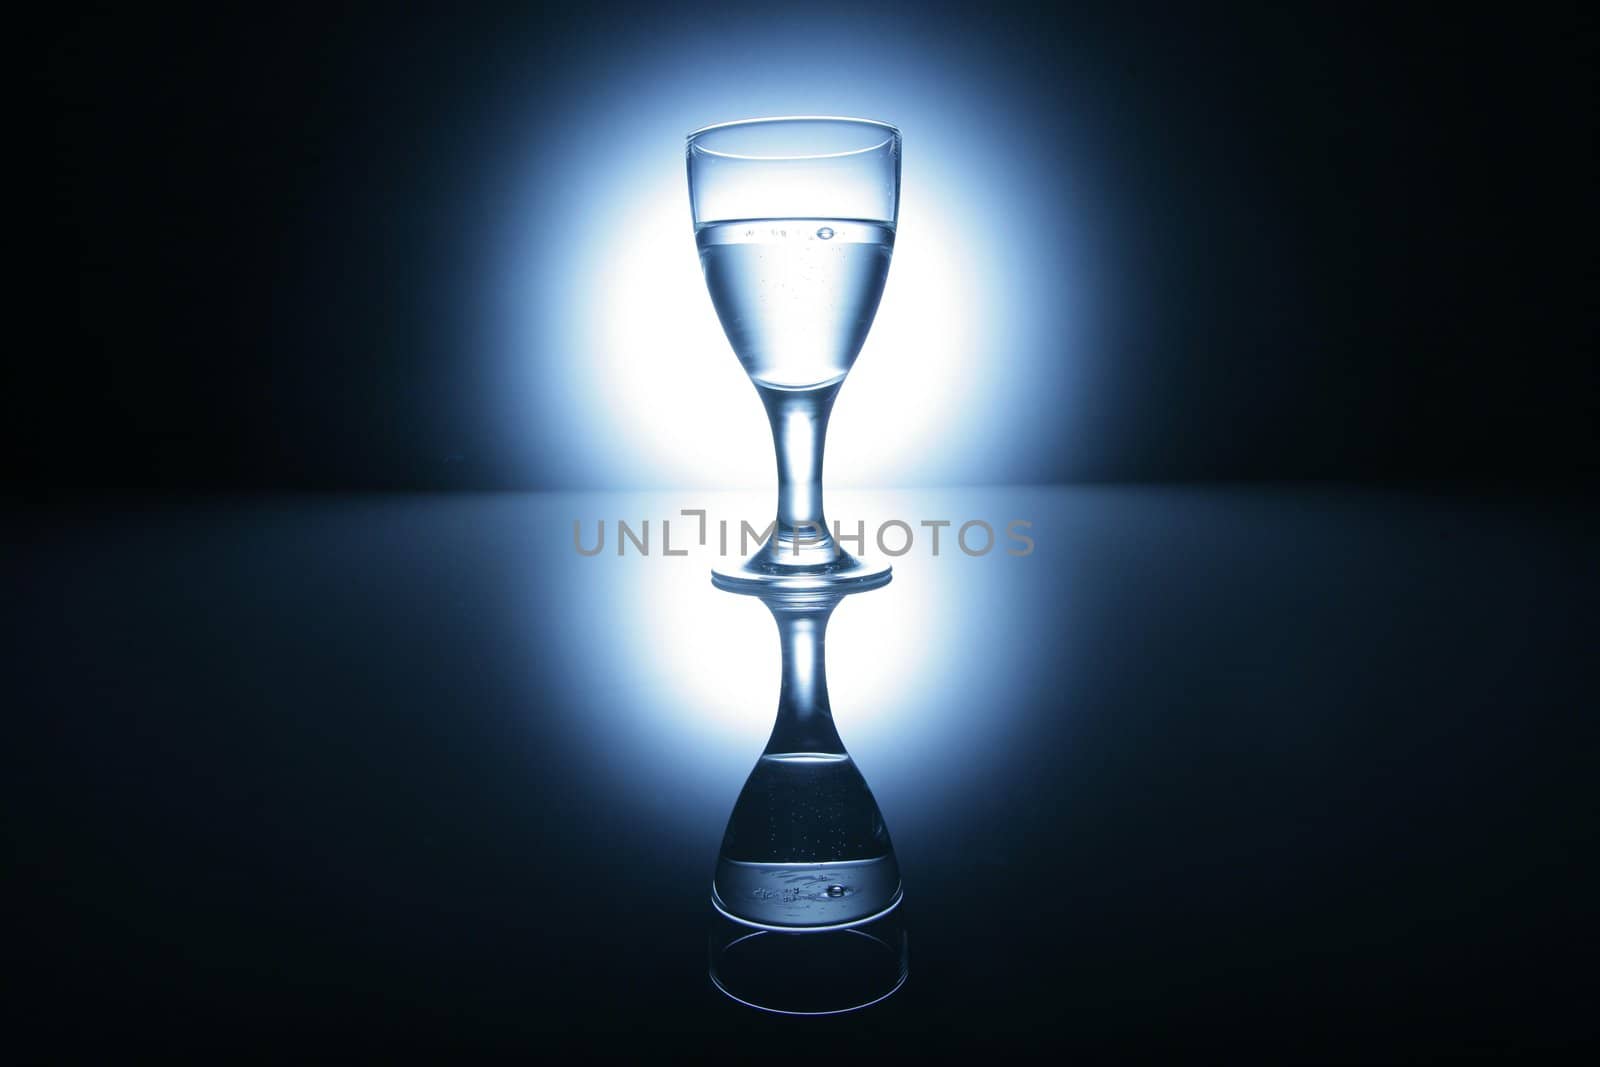 water glass on reflecting ground shimmering blue